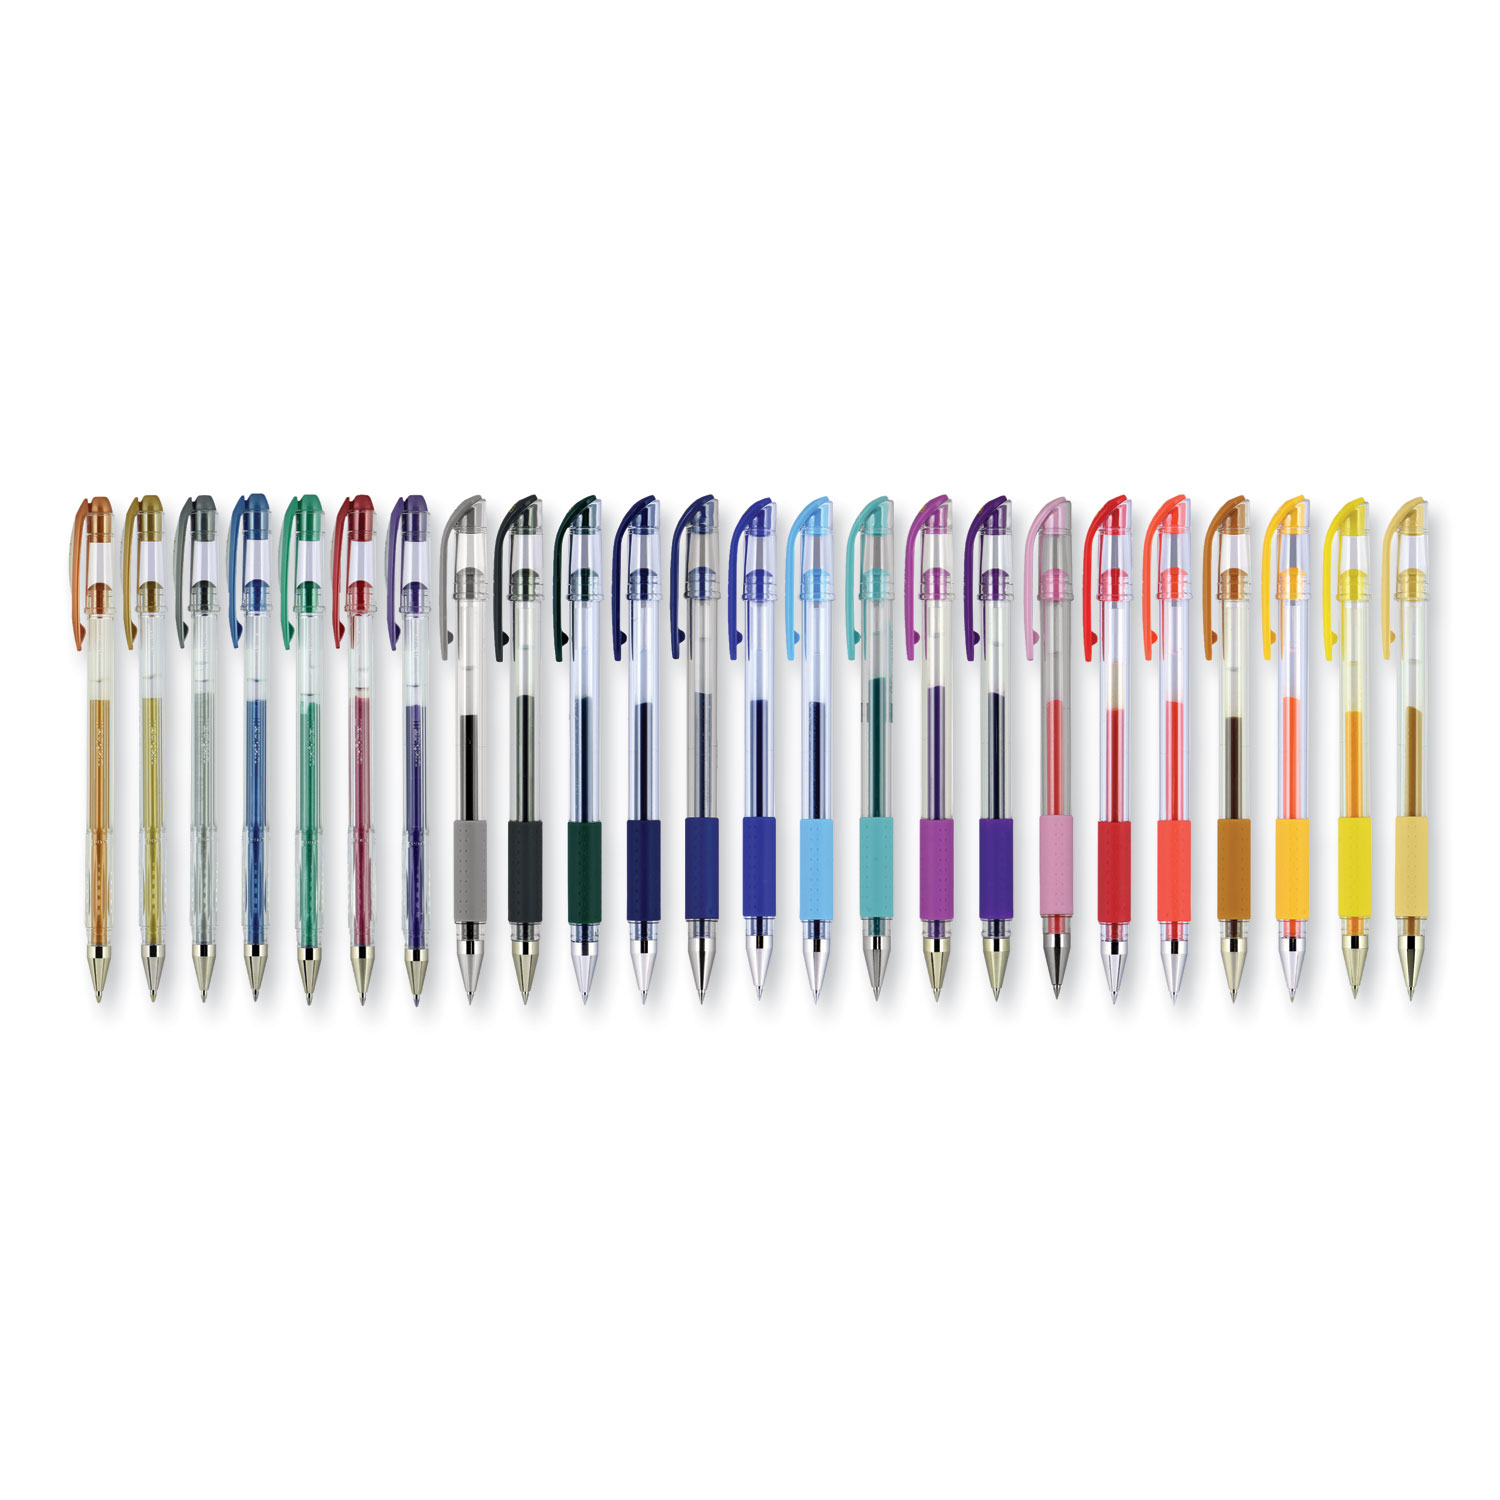 Gel Pen, Stick, Assorted Sizes, Assorted Ink and Barrel Colors, 24/Pack -  Bluebird Office Supplies